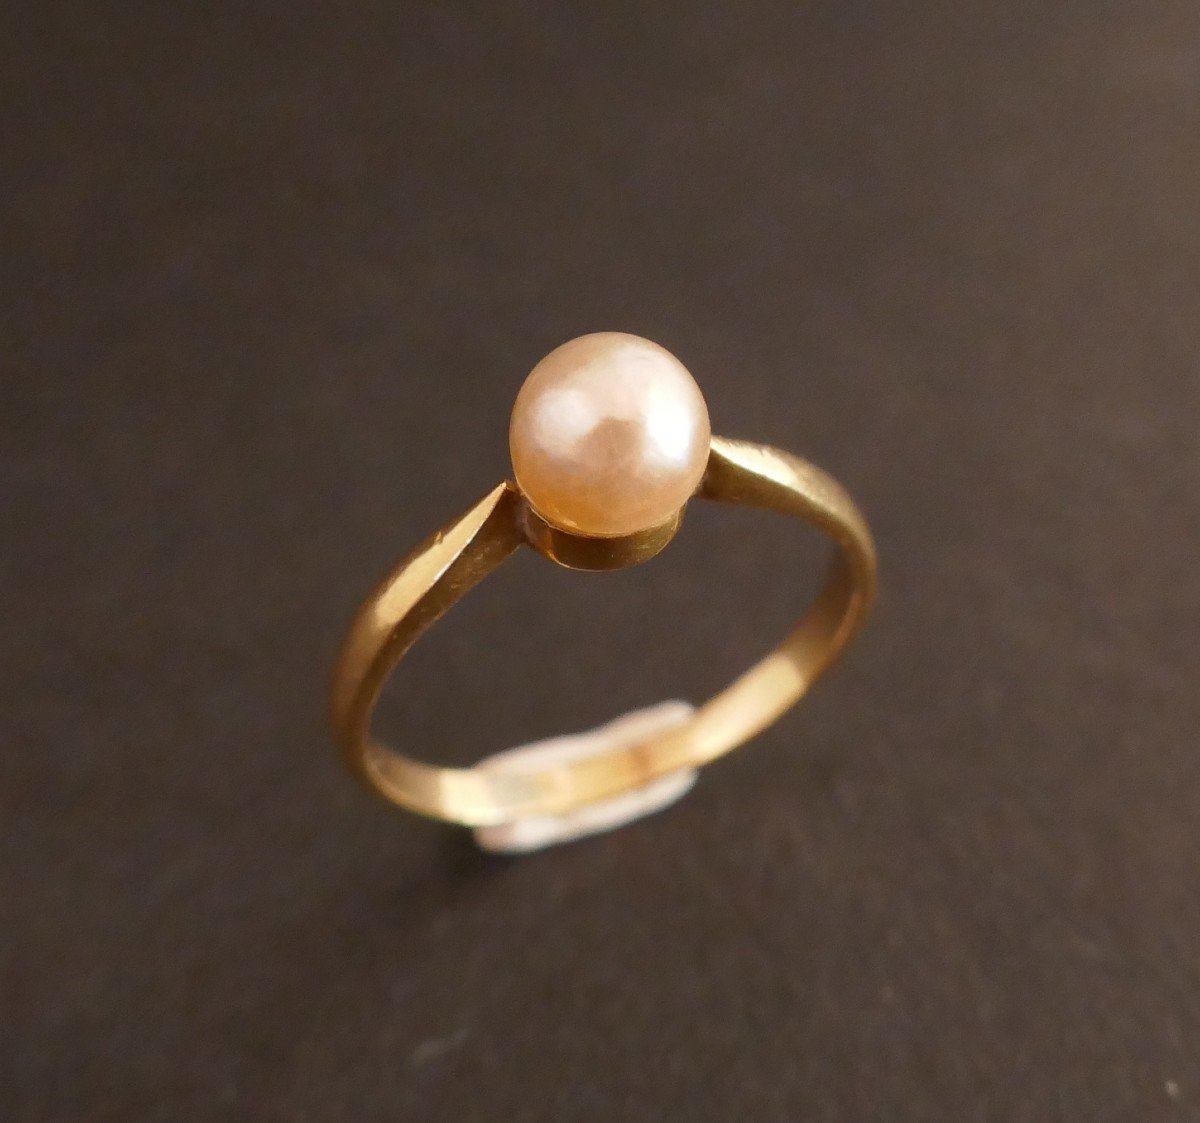 Ring Set With A Cultured Pearl, 18k Gold.-photo-4